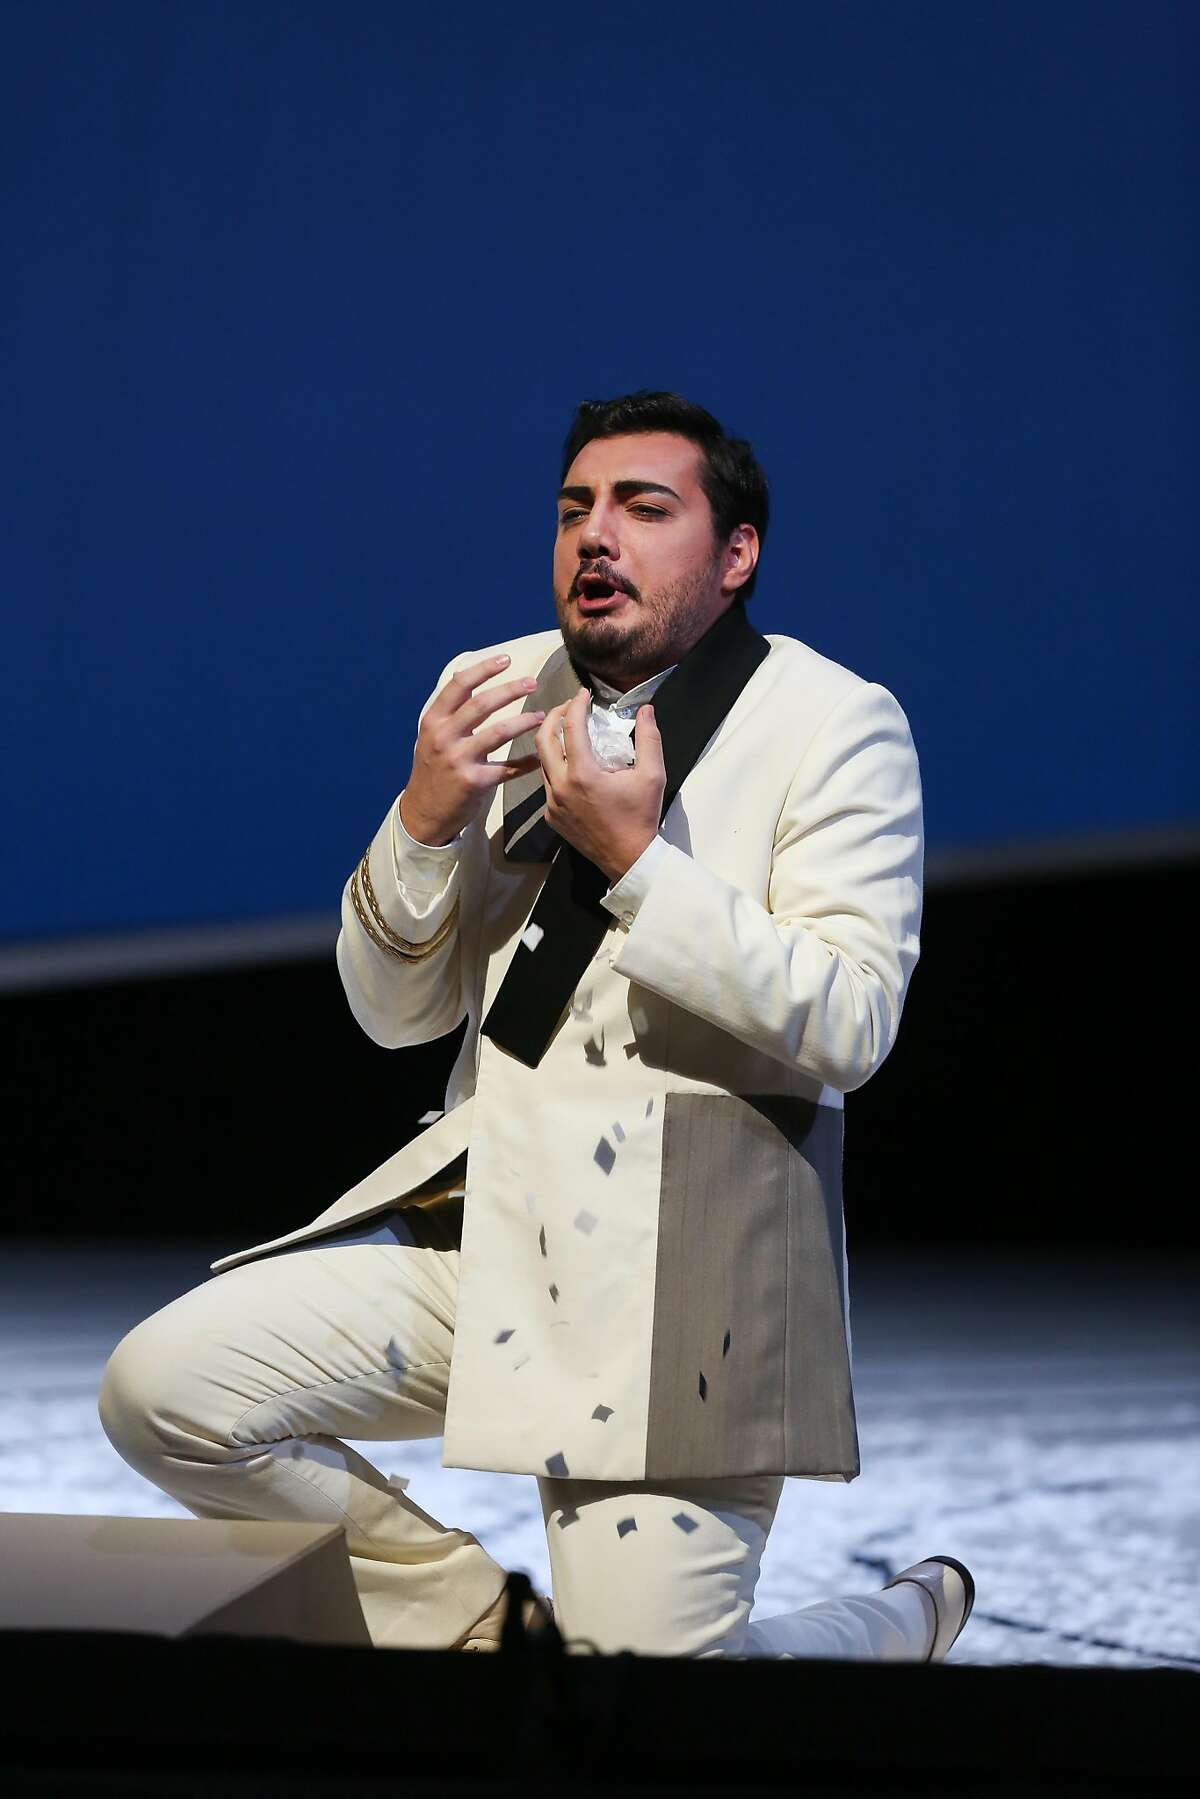 Vincenzo Costanzo as Lt. B. F. Pinkerton in SF Opera's final dress rehearsal of Puccini's "Madama Butterfly" on Thursday, Oct 3, 2016 in San Francisco, Calif.